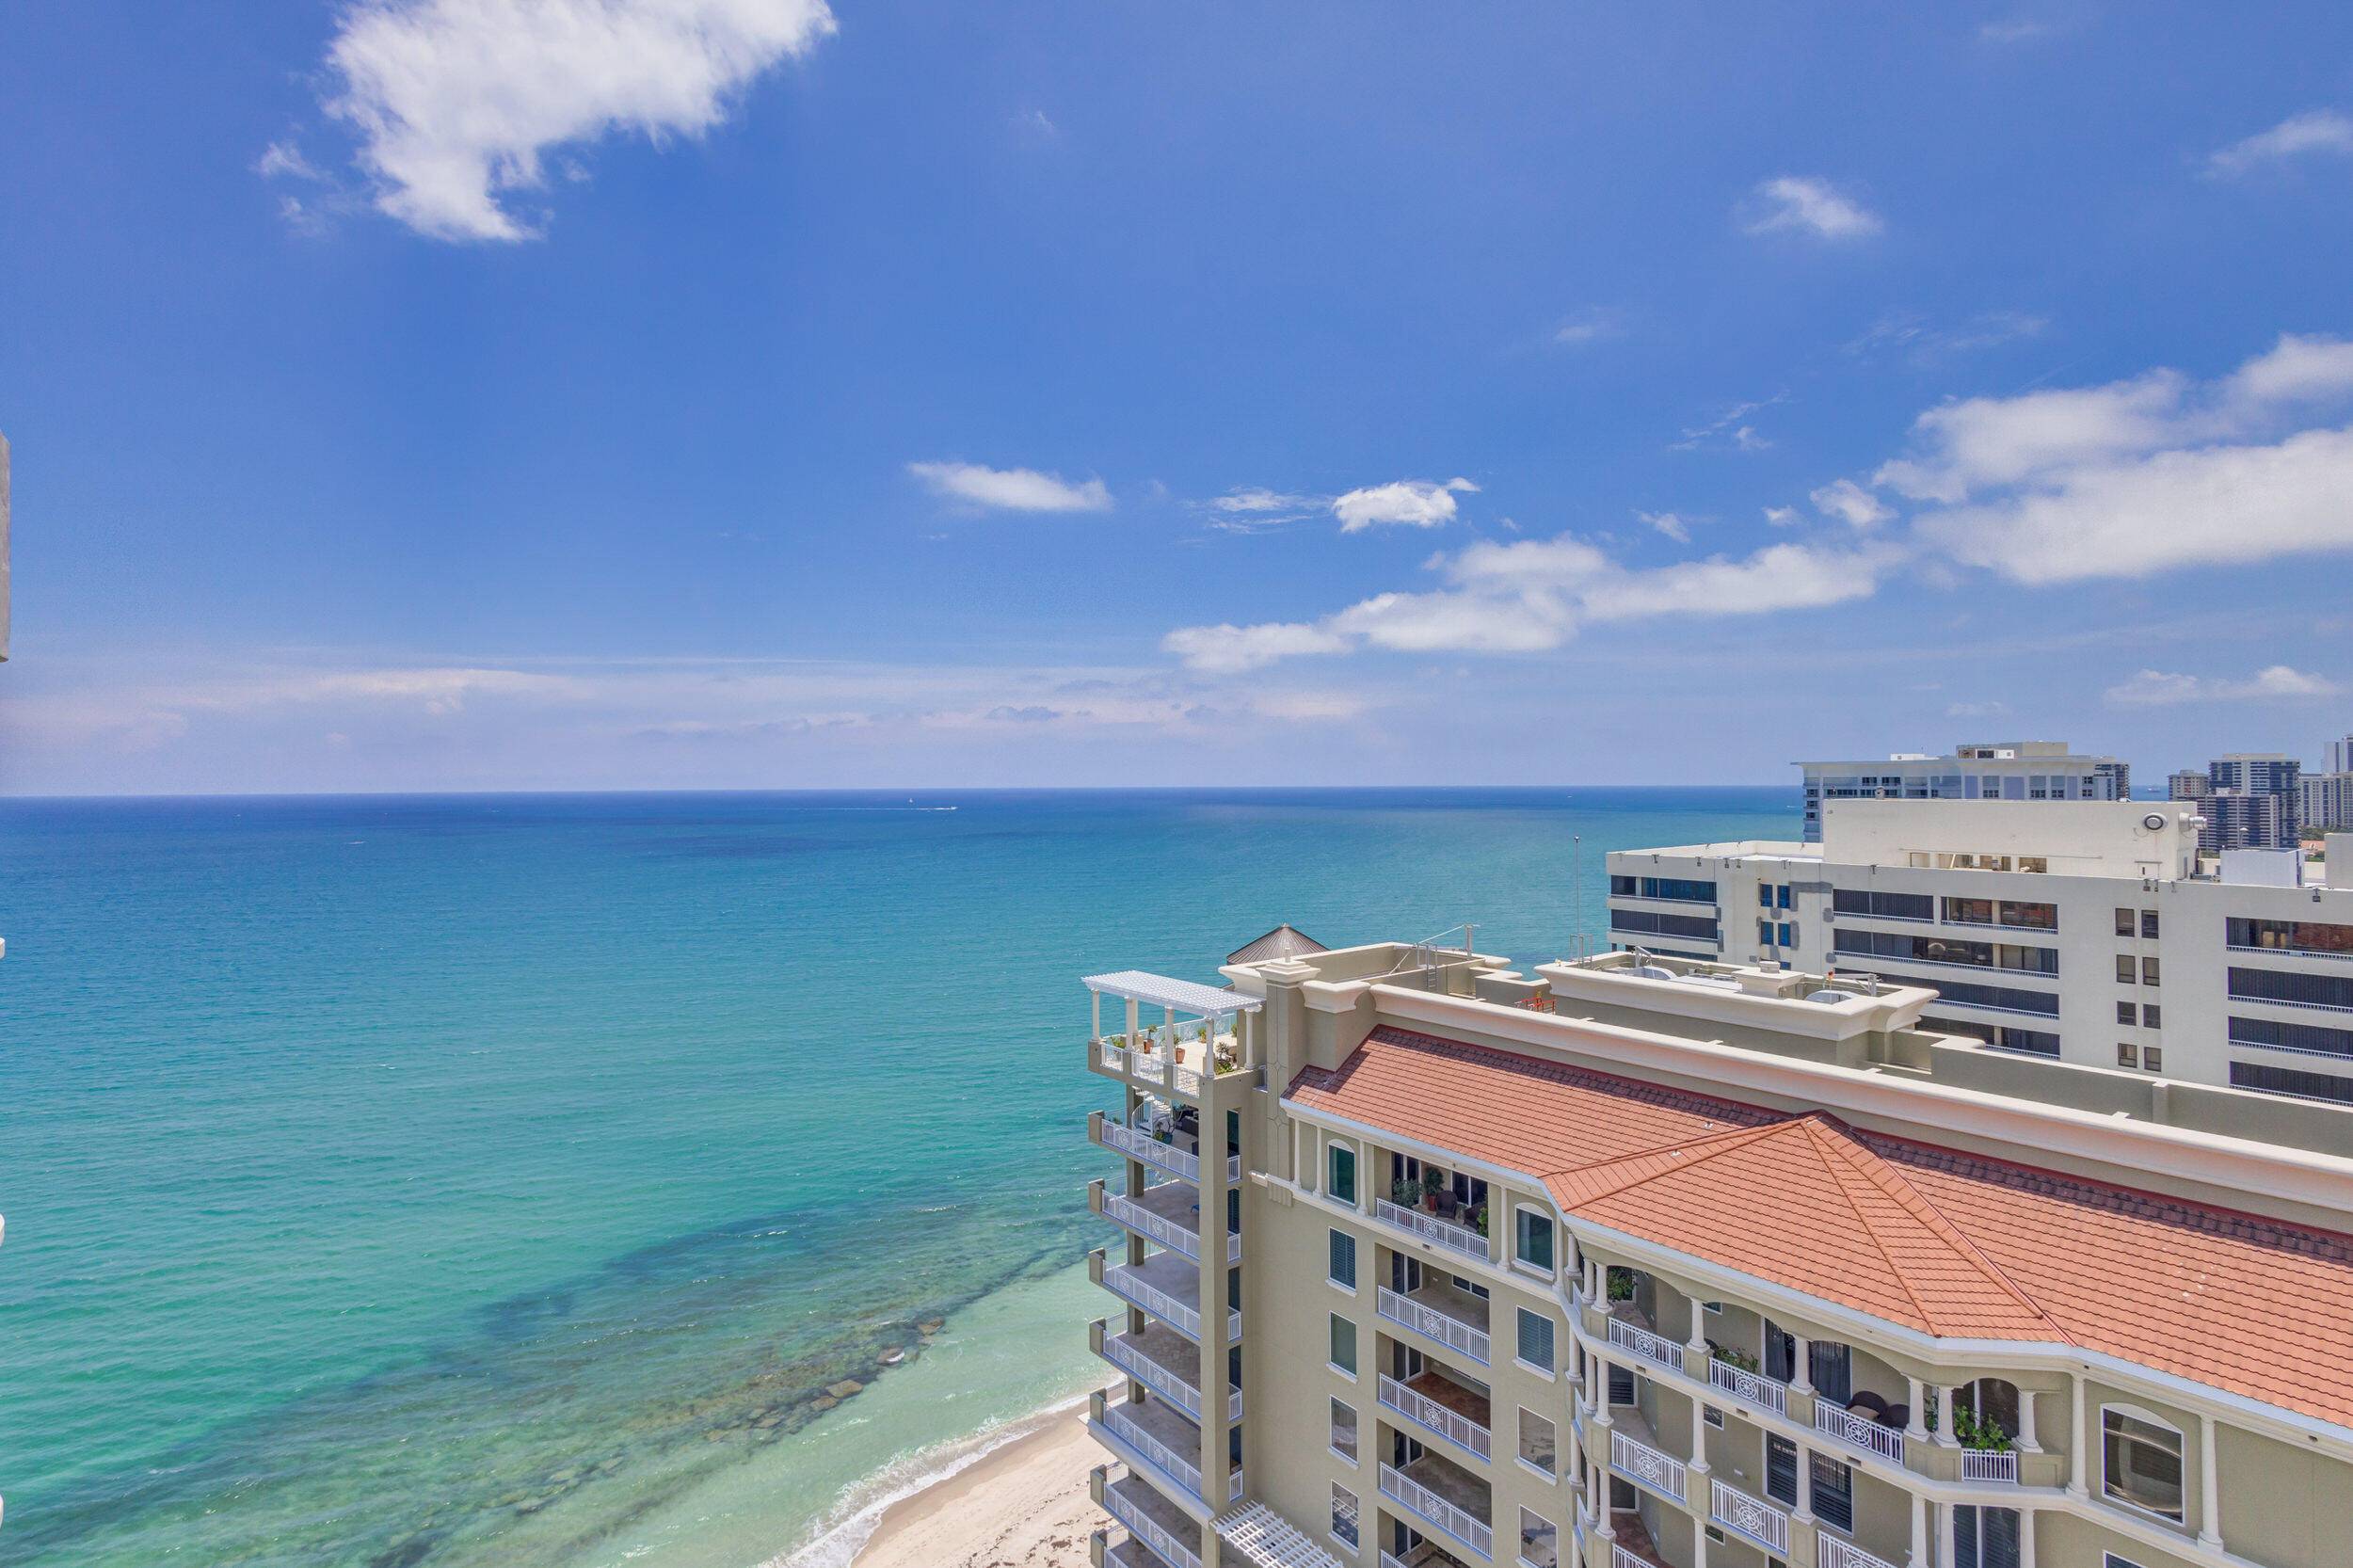 THIS FABULOUS PENTHOUSE RARELY OFFERED 2 BEDROOM 2 BATHROOM HOME HAS BEEN TOTALLY UPGRADED WITH CUSTOM KITCHEN CABINETS, HIGH END APPLIANCES, NEW TILE BATHROOMS, FRAMELESS SHOWER DOORS, ALL TILE FLOORS.